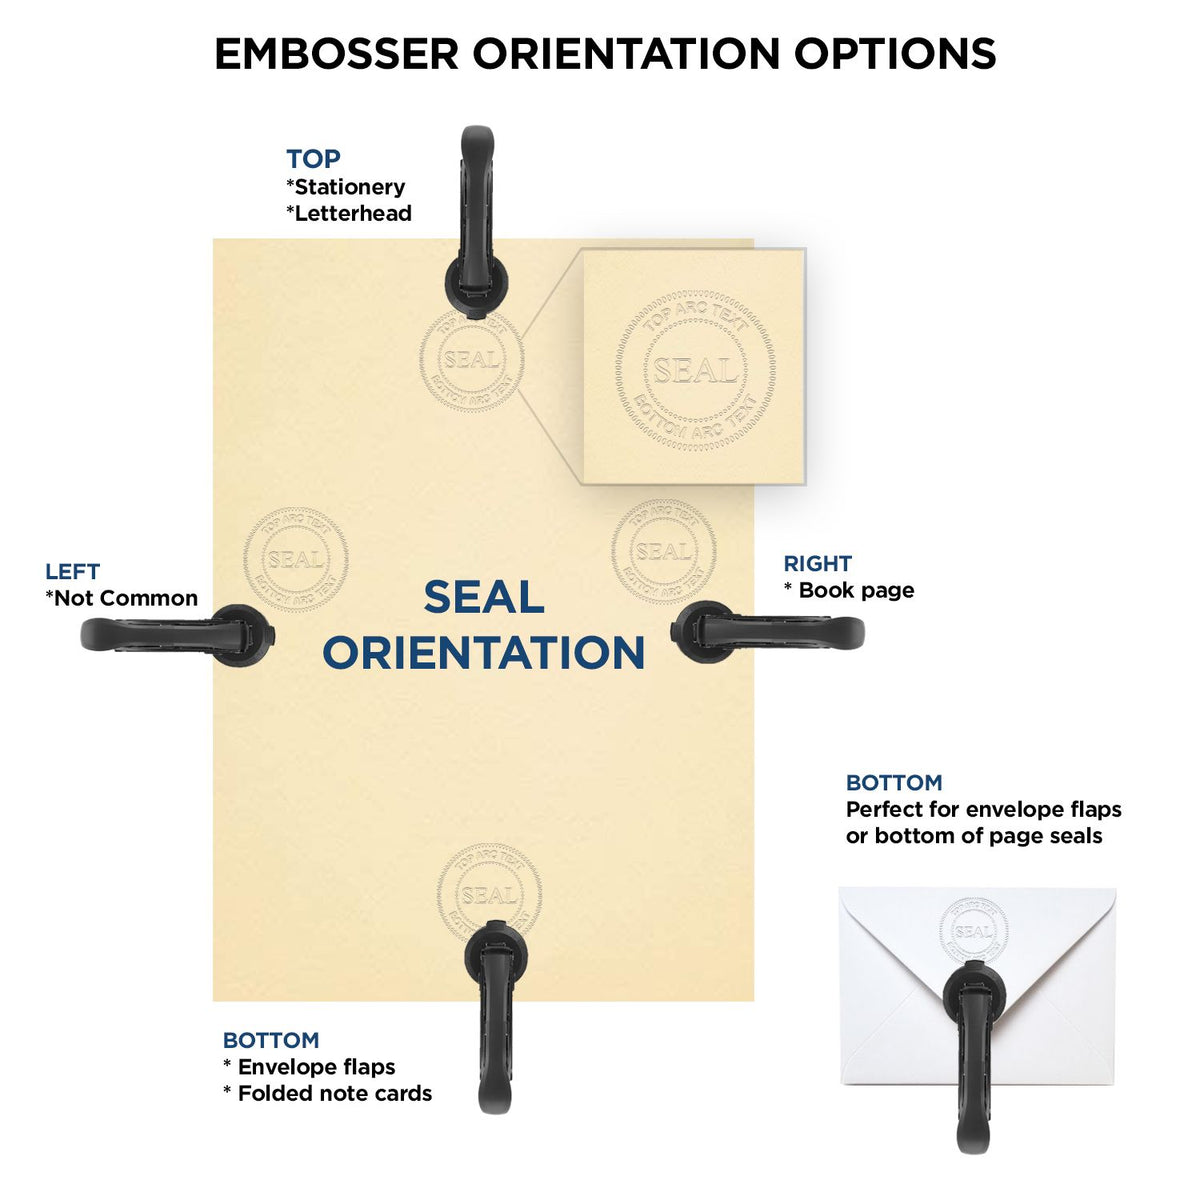 An infographic for the State of South Carolina Soft Land Surveyor Embossing Seal showing embosser orientation, this is showing examples of a top, bottom, right and left insert.